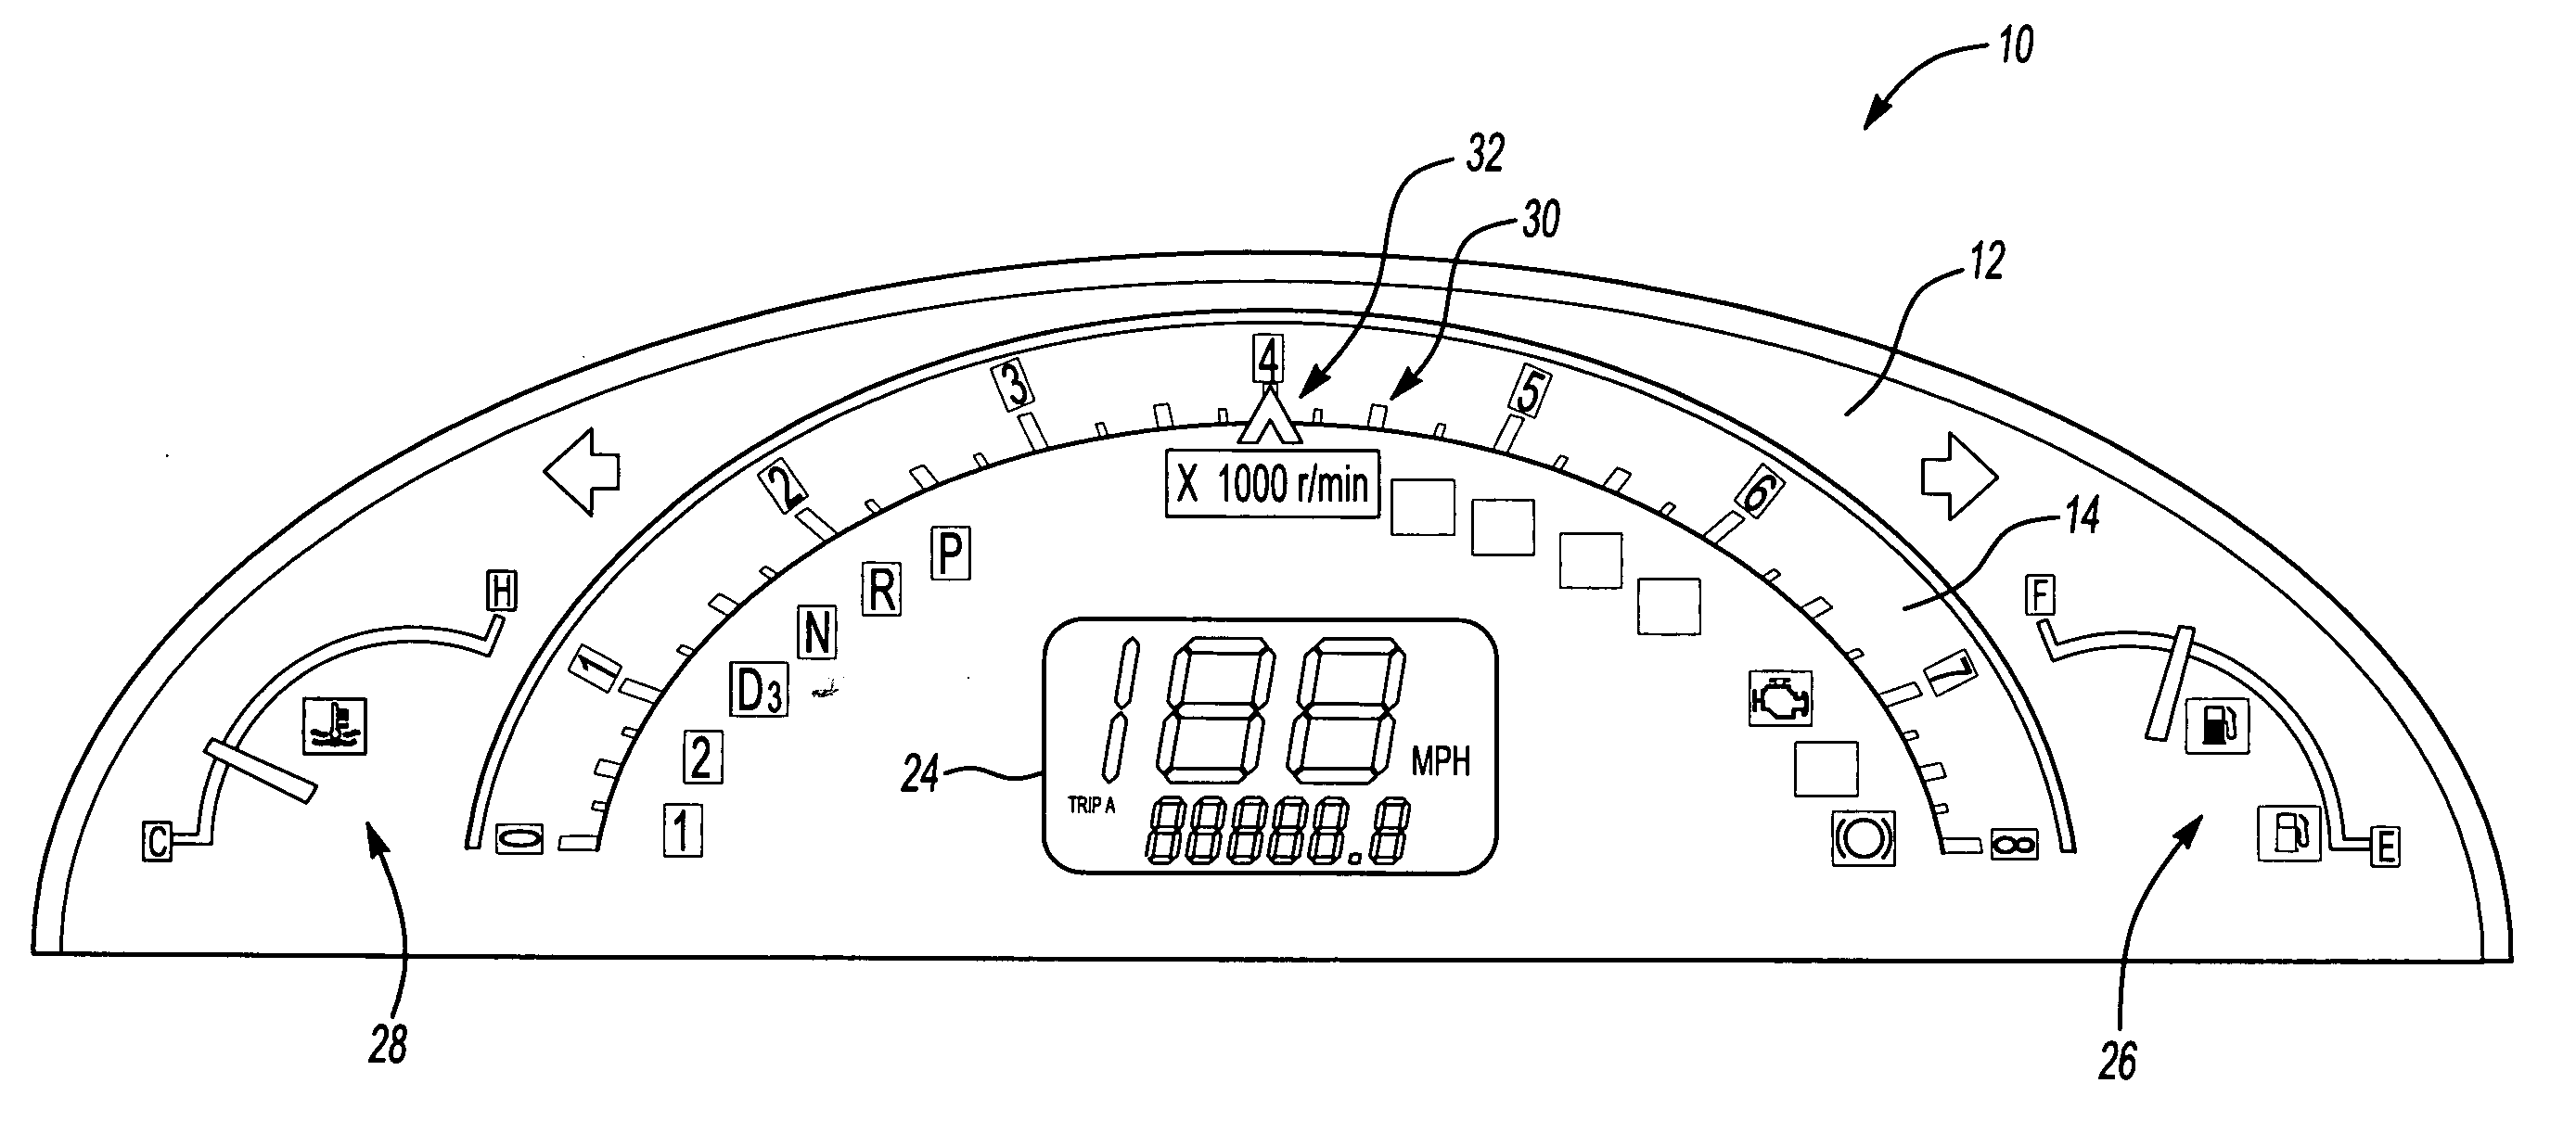 Generated pointer image for an instrument cluster display